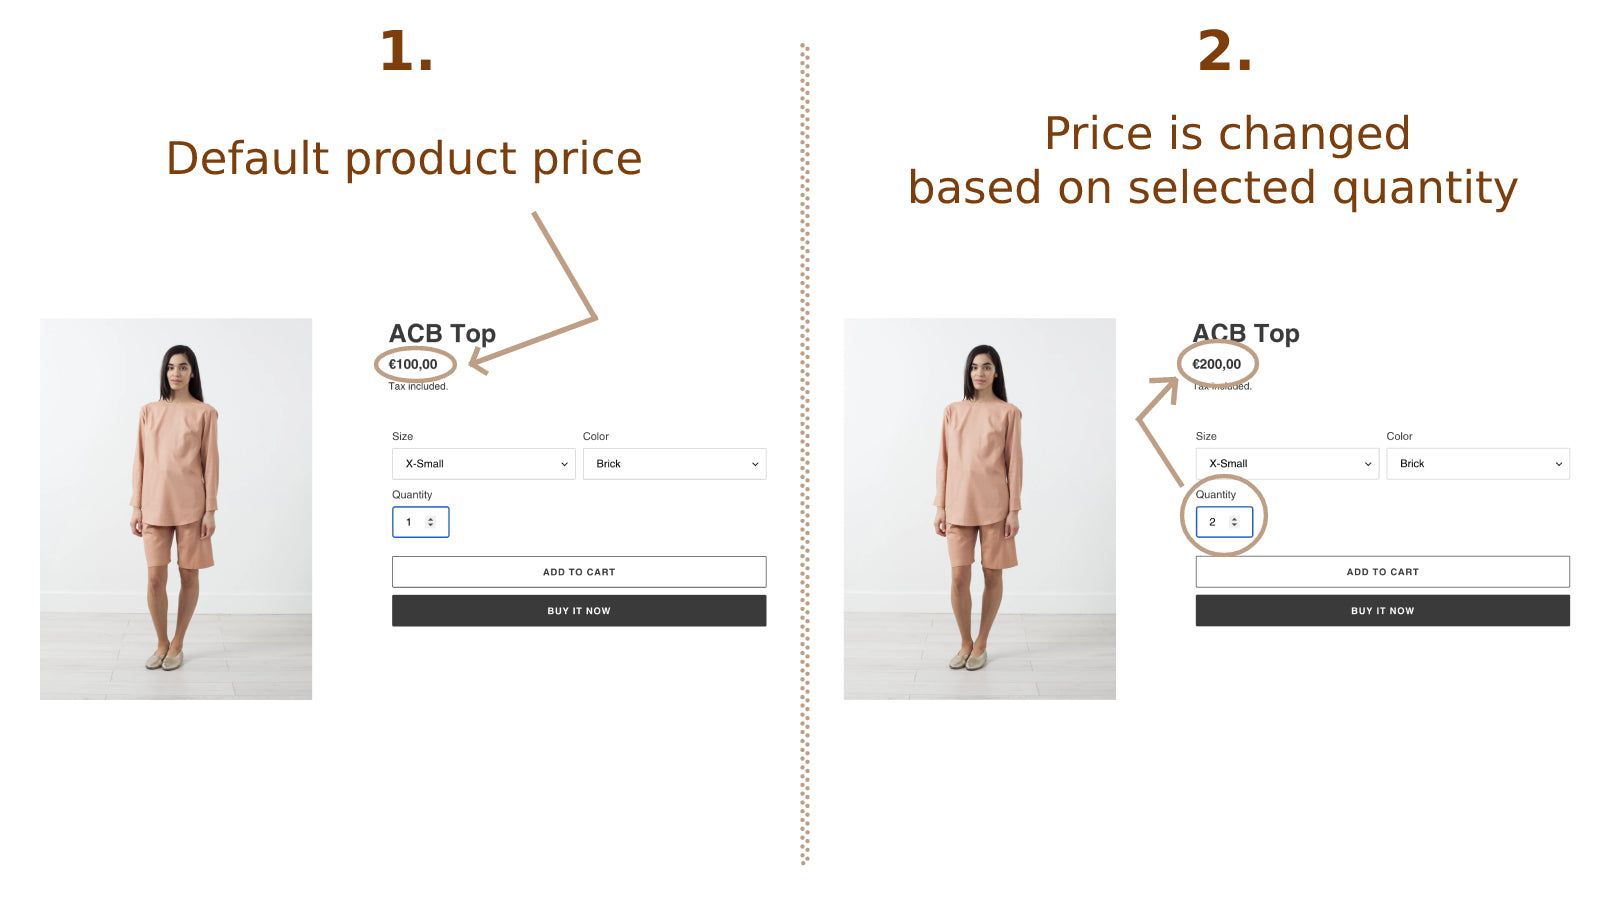 Price is changed based on selected quantity in product detail